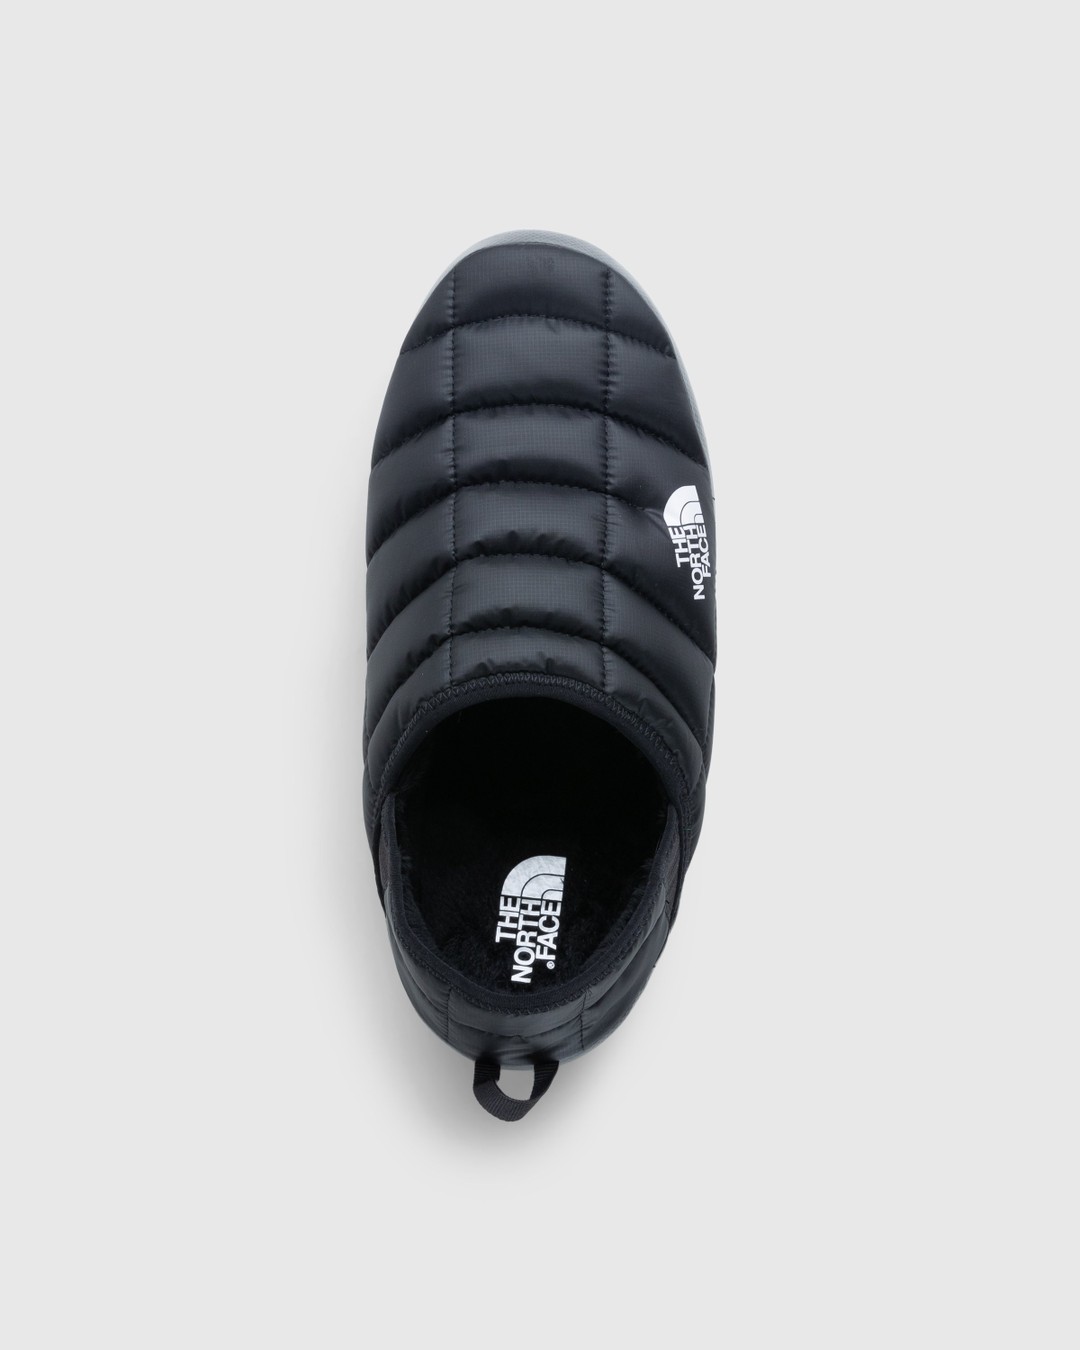 The North Face – ThermoBall Traction Mules V TNF Black/White - Sandals & Slides - Black - Image 5